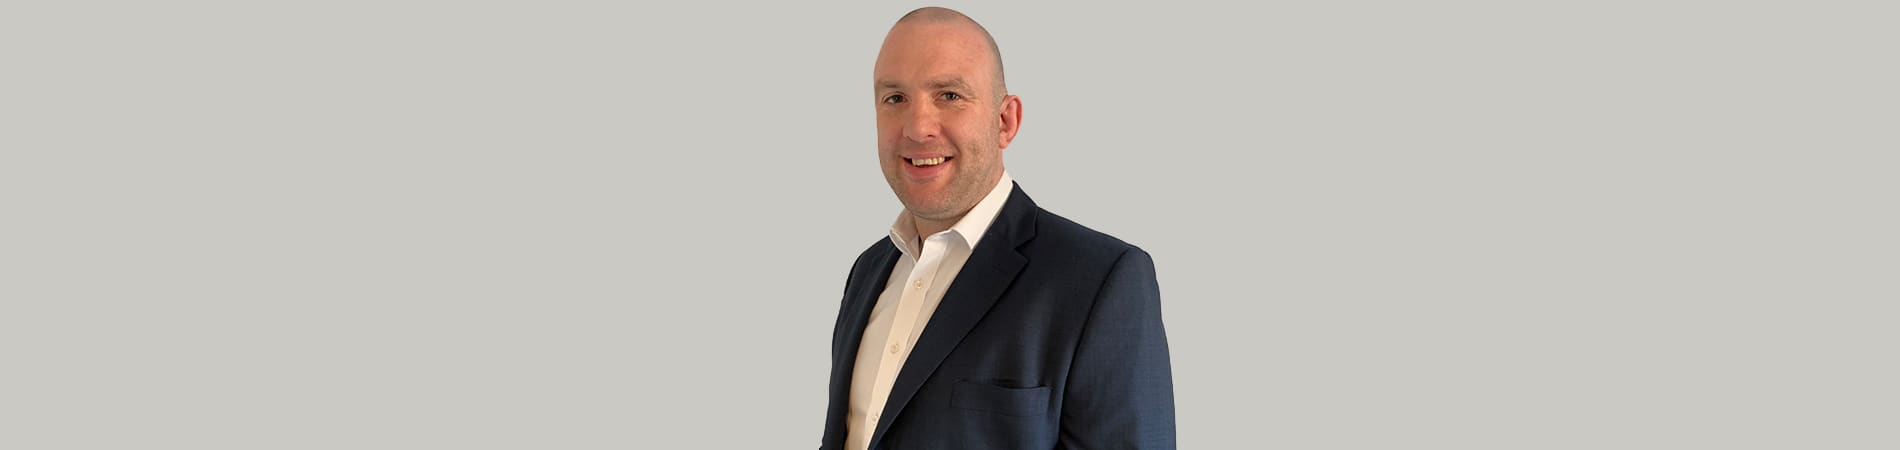 Marshalls Nick Sharpe named a Supplier Influencer by the Builders Merchant Federation 